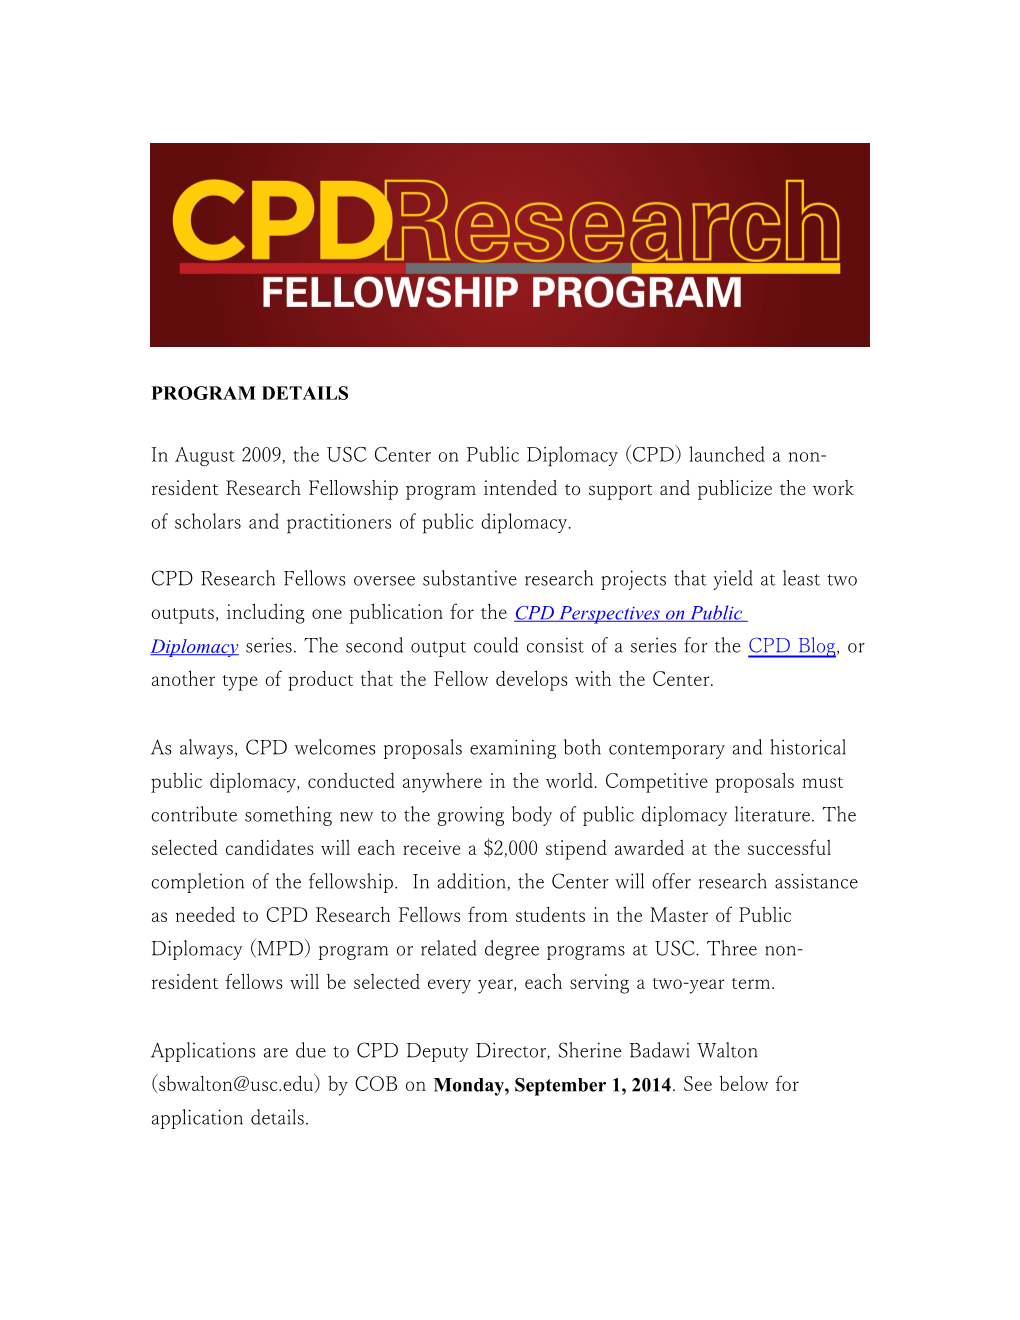 To See a List of Current CPD Research Fellows and Their Projects,Click Here